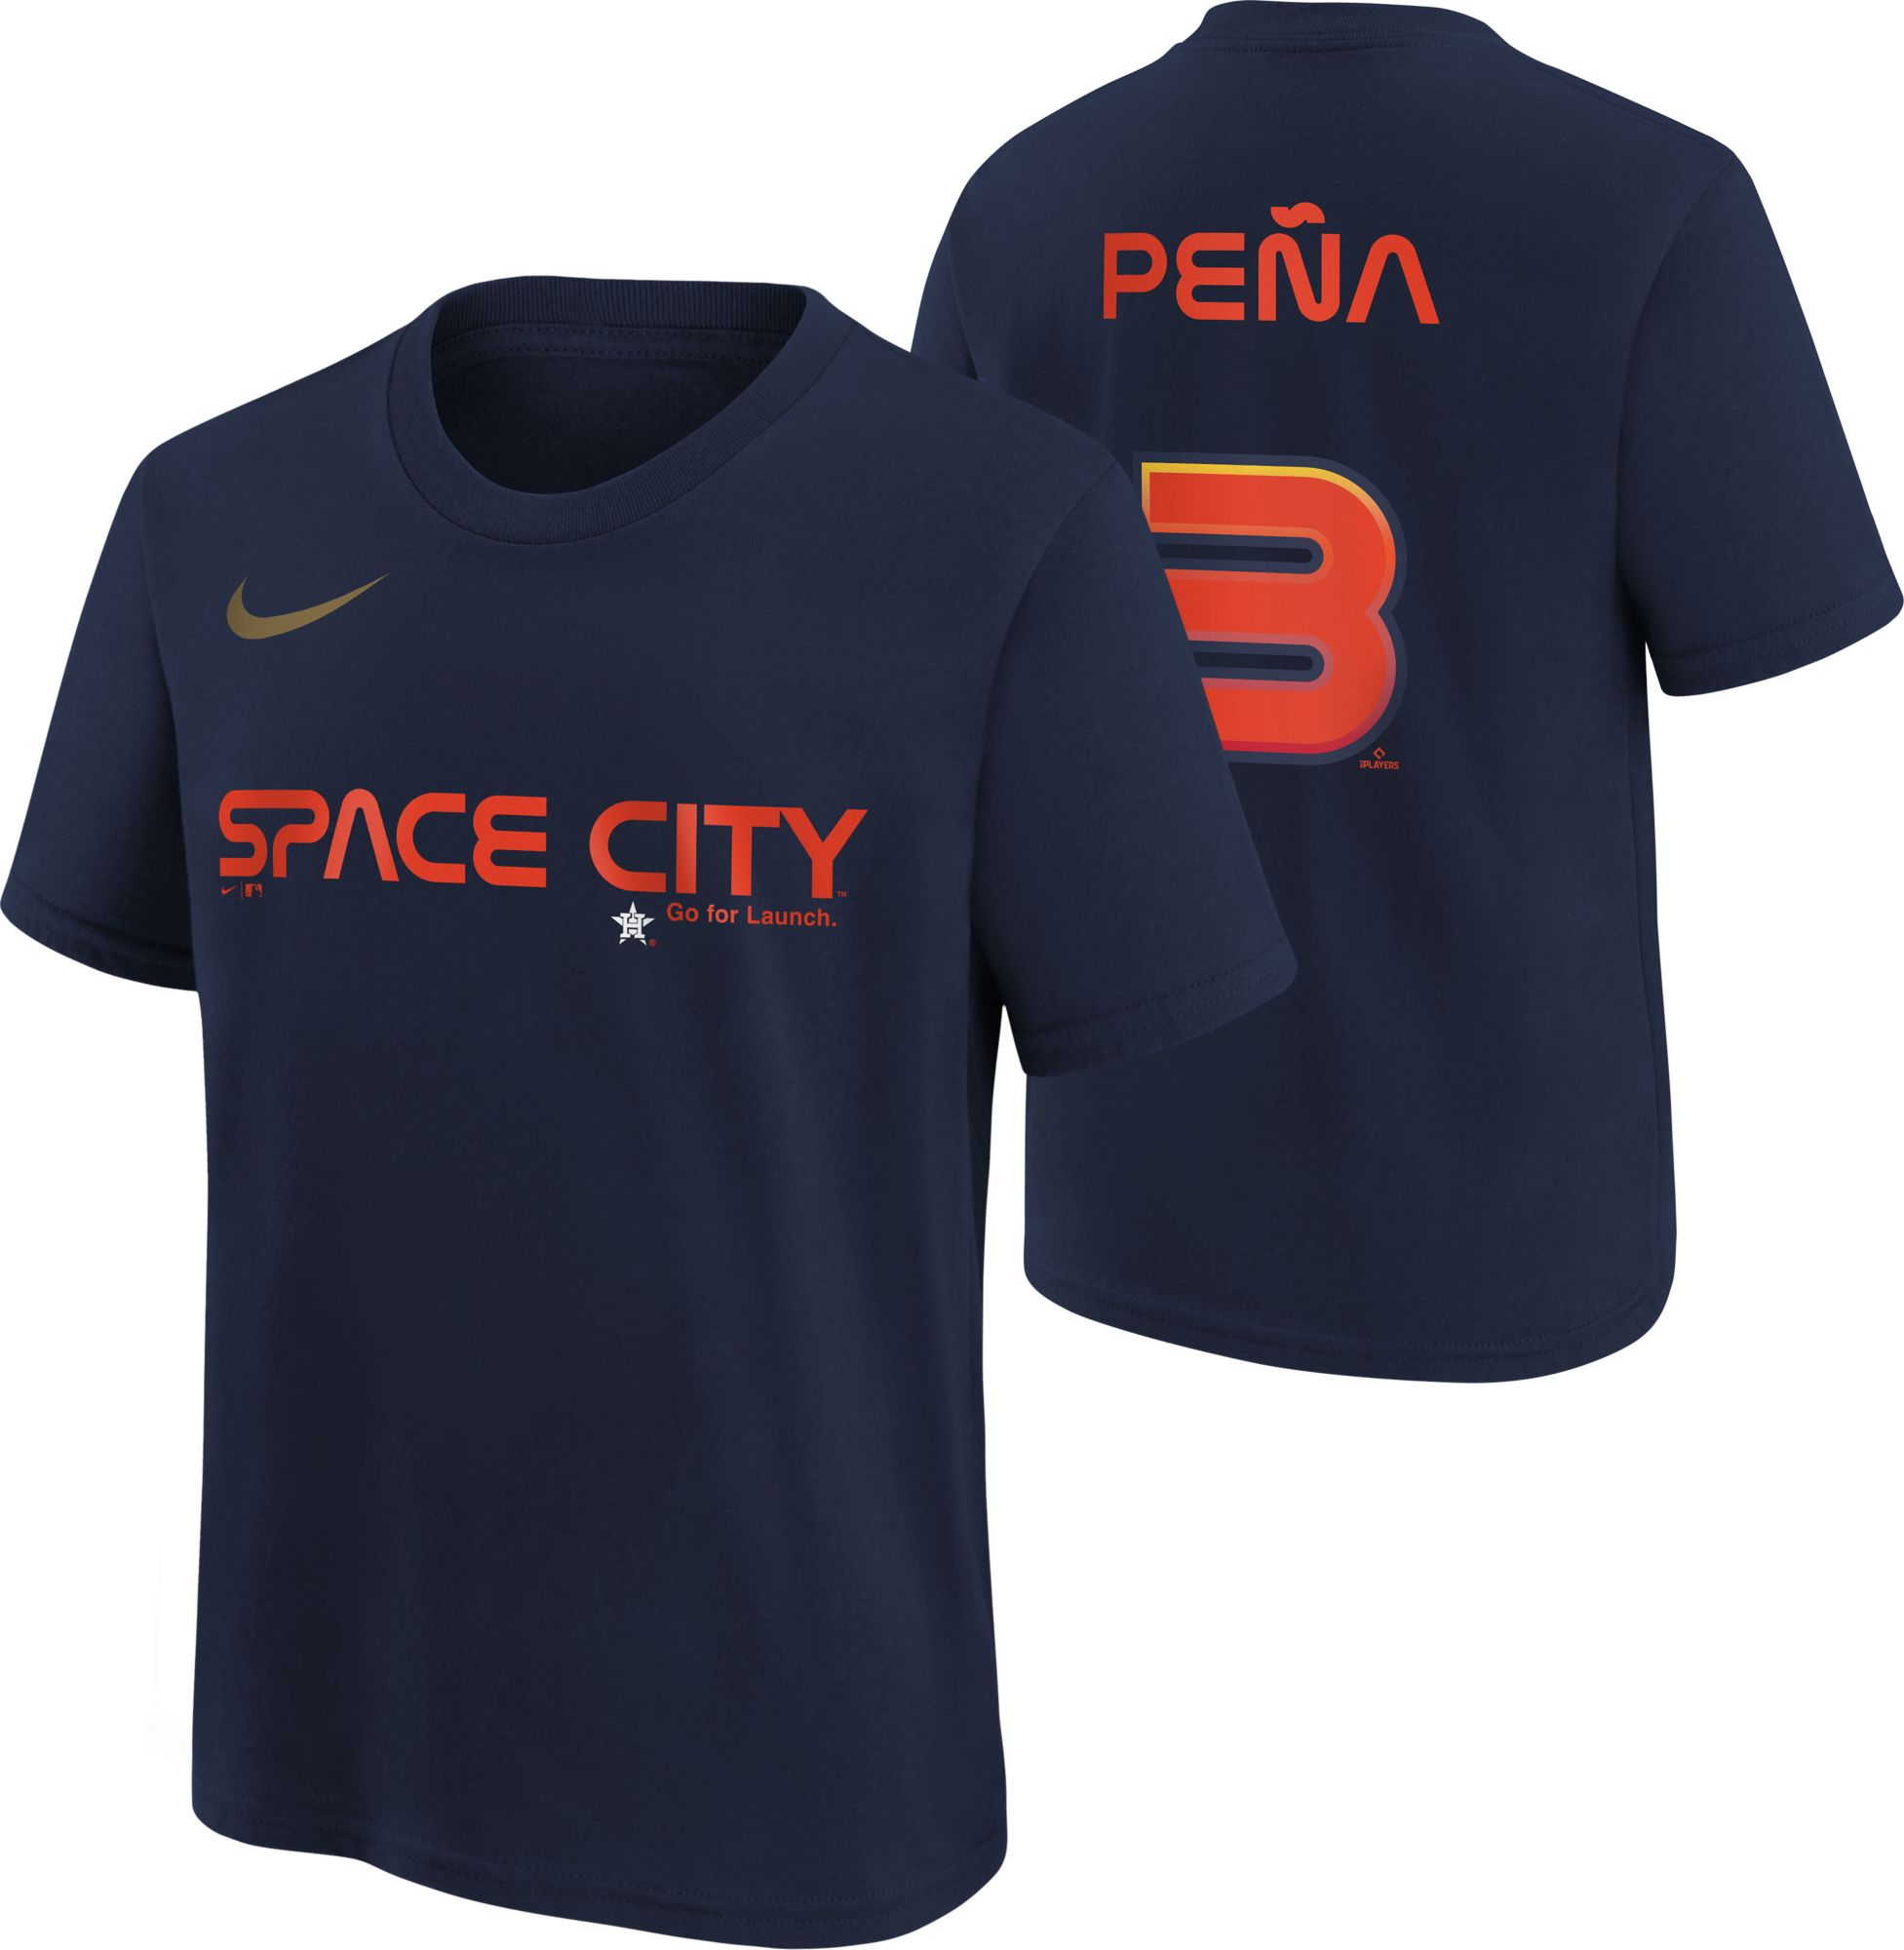 Astros' Space City Jerseys Steal the Show at This Baseball Fundraiser —  SpringSpirit Gets Chic to Help Kids